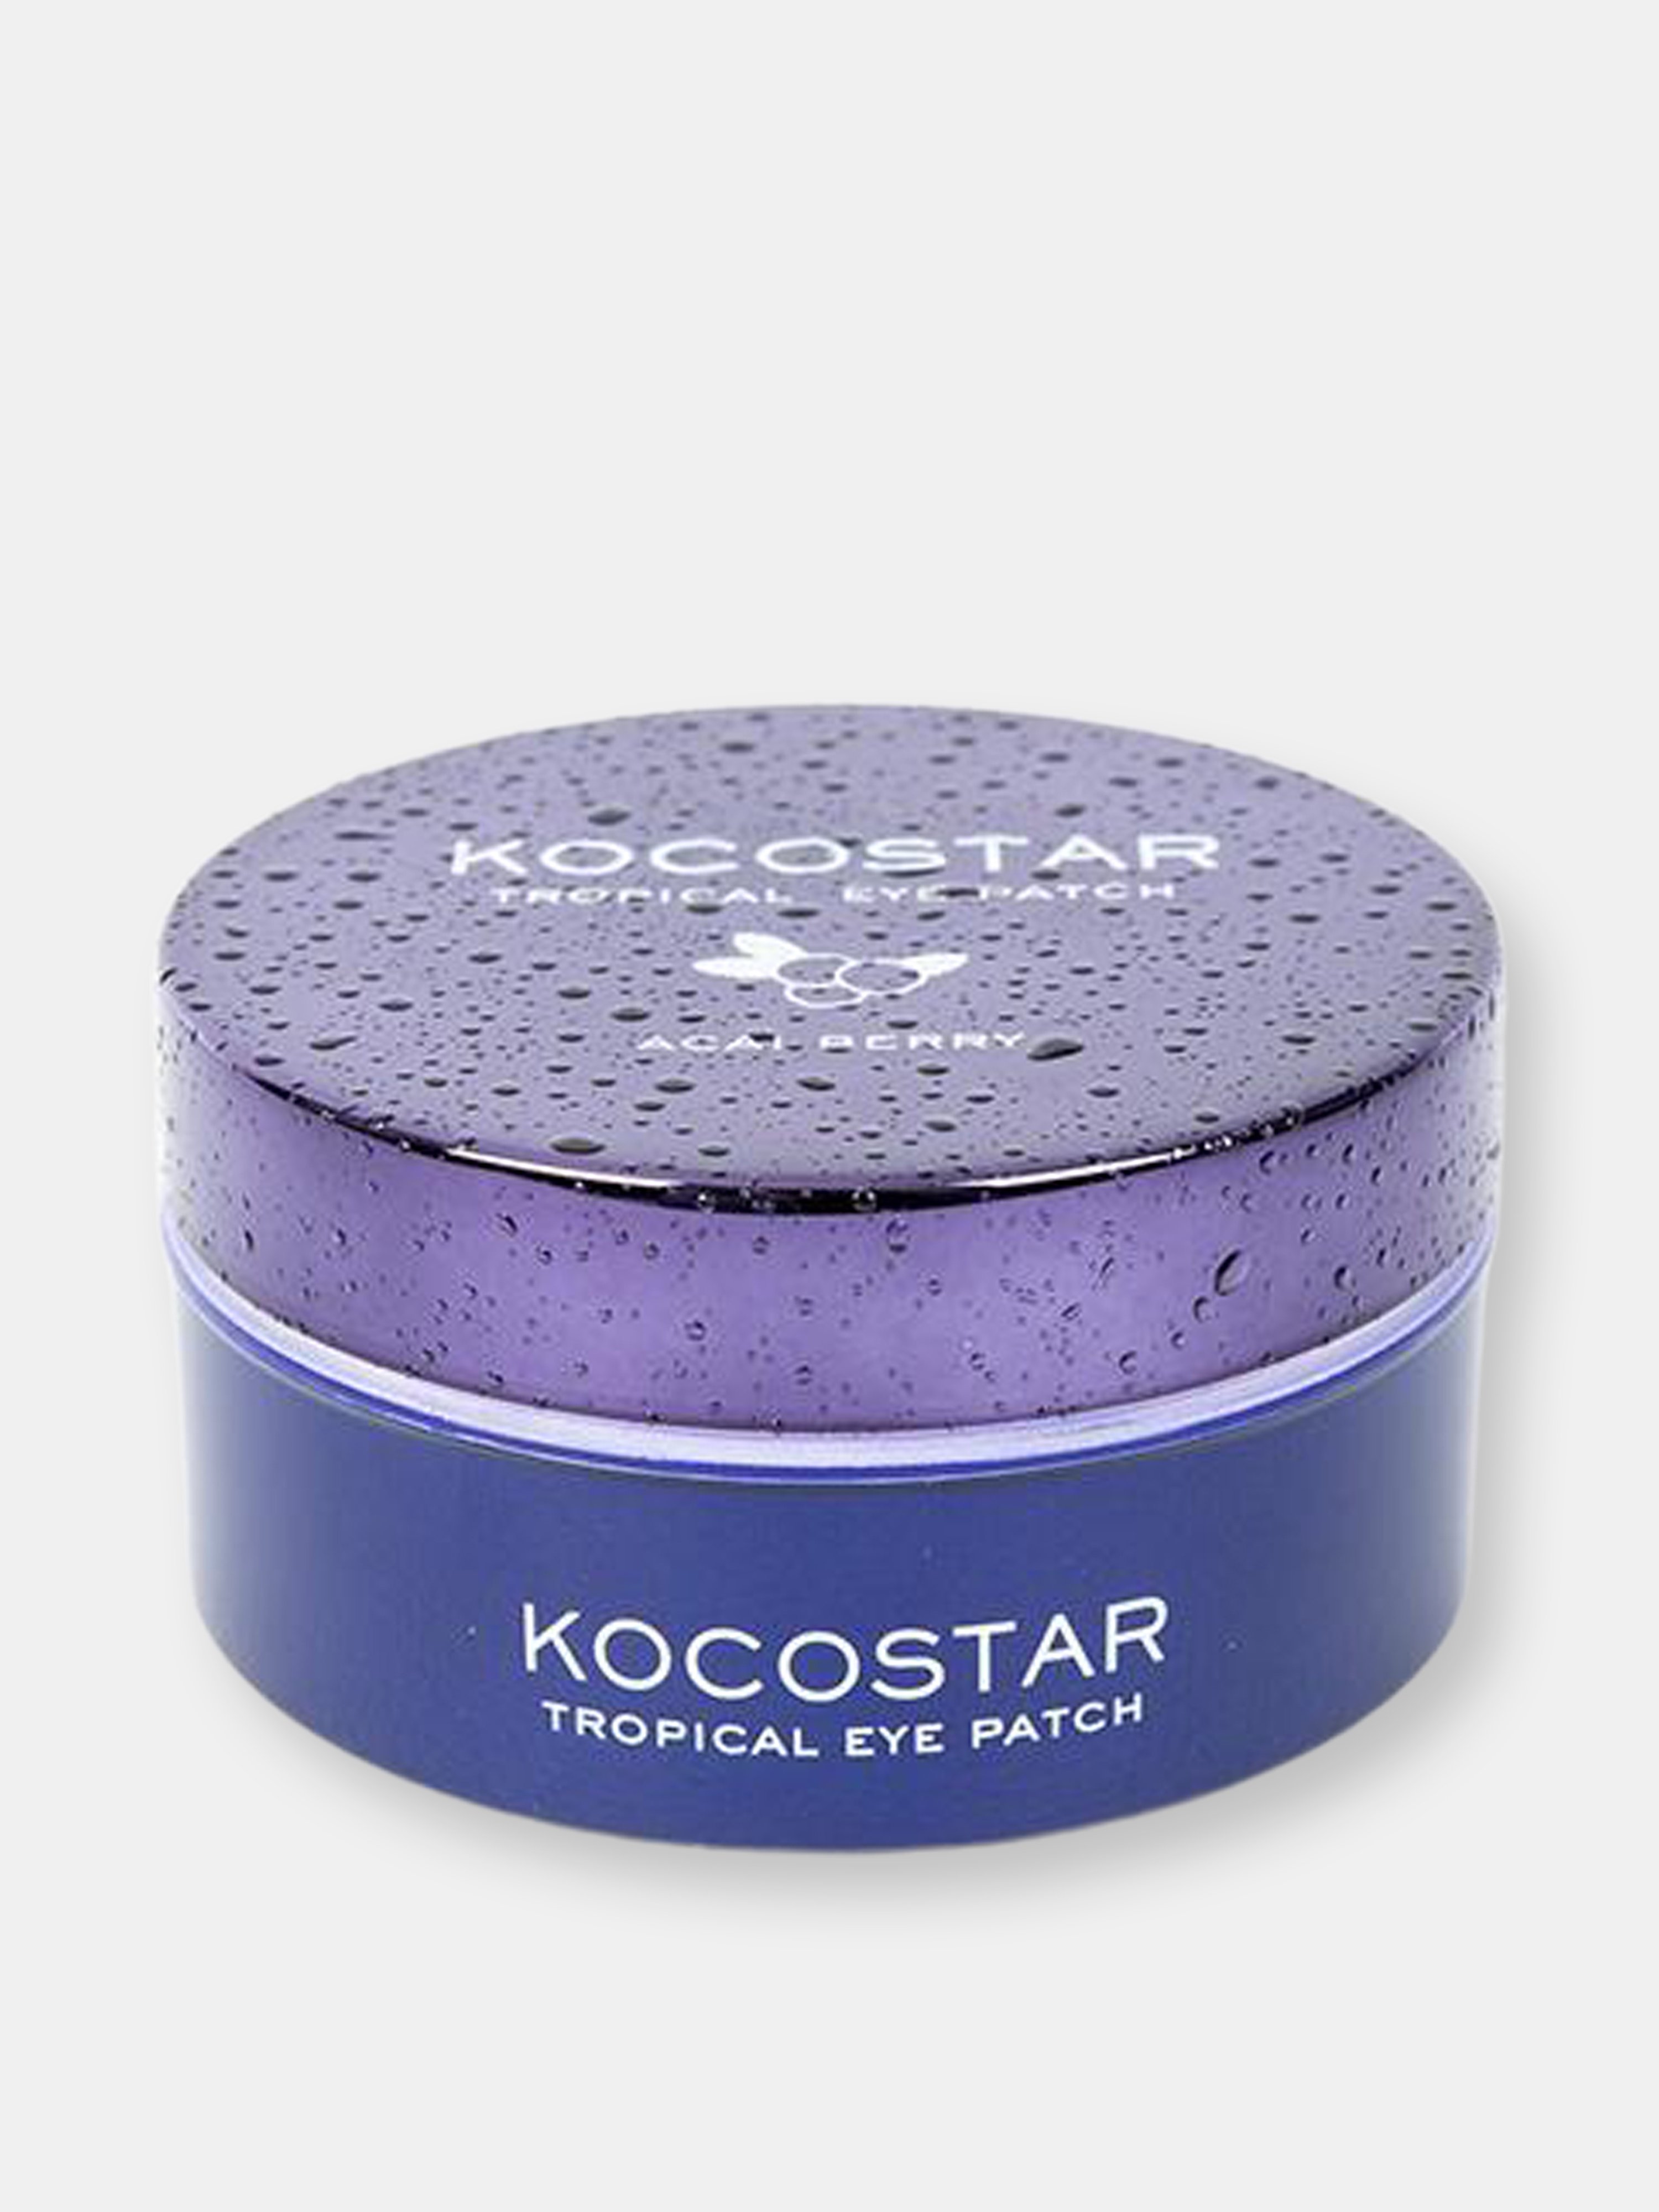 Kocostar Tropical Eye Patch Acai Berry Unscented 30 Pairs